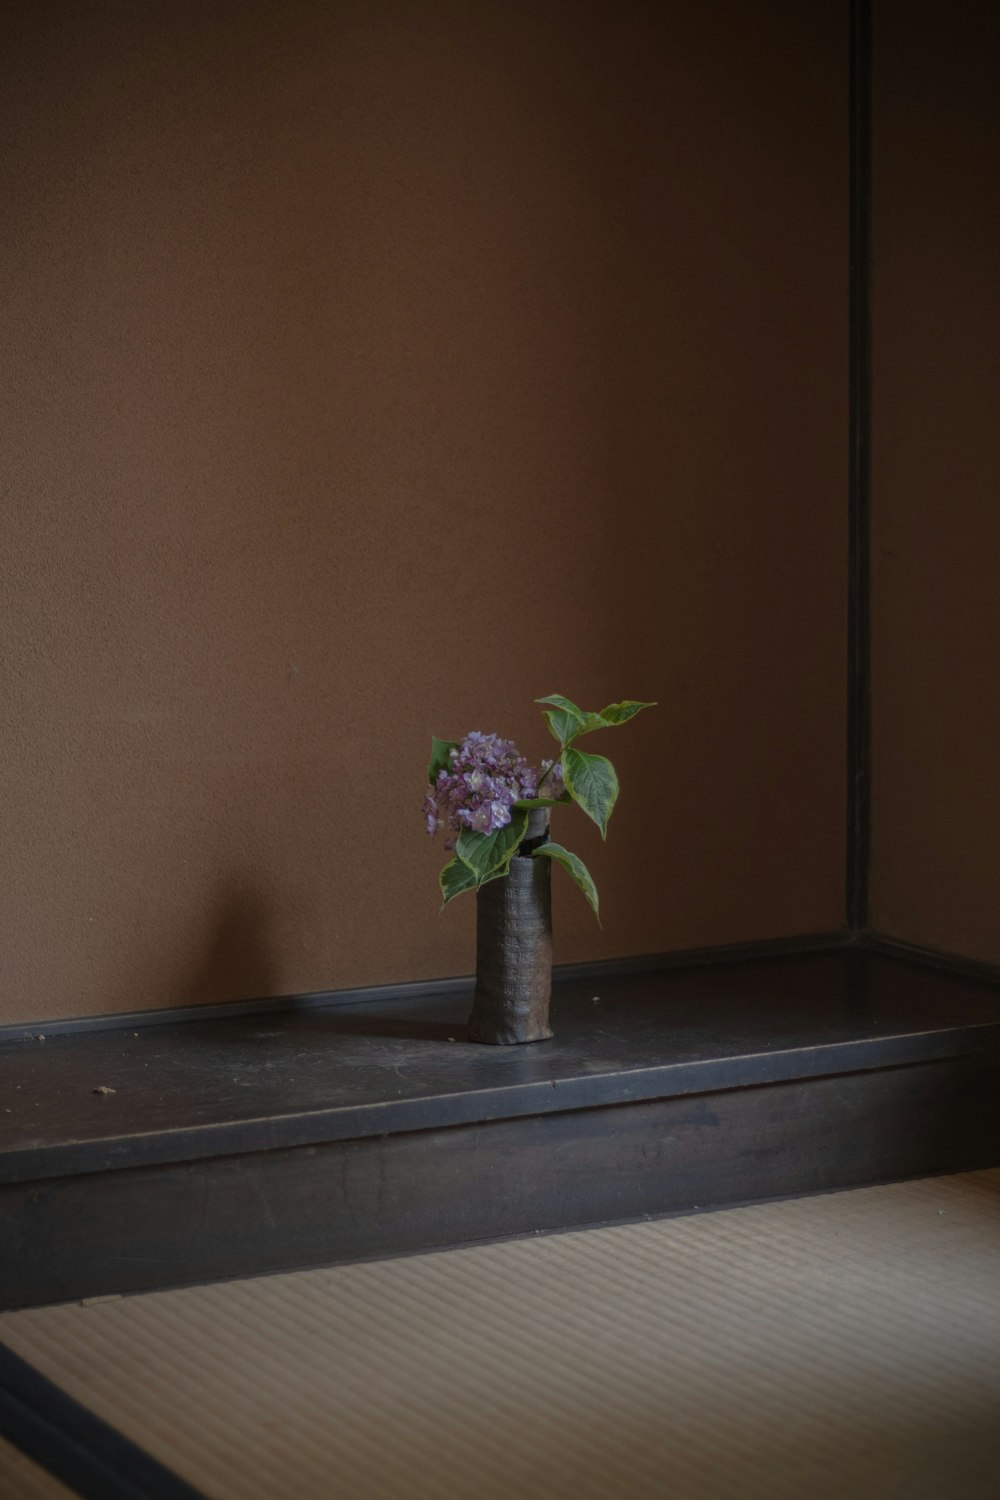 a small vase with a purple flower in it